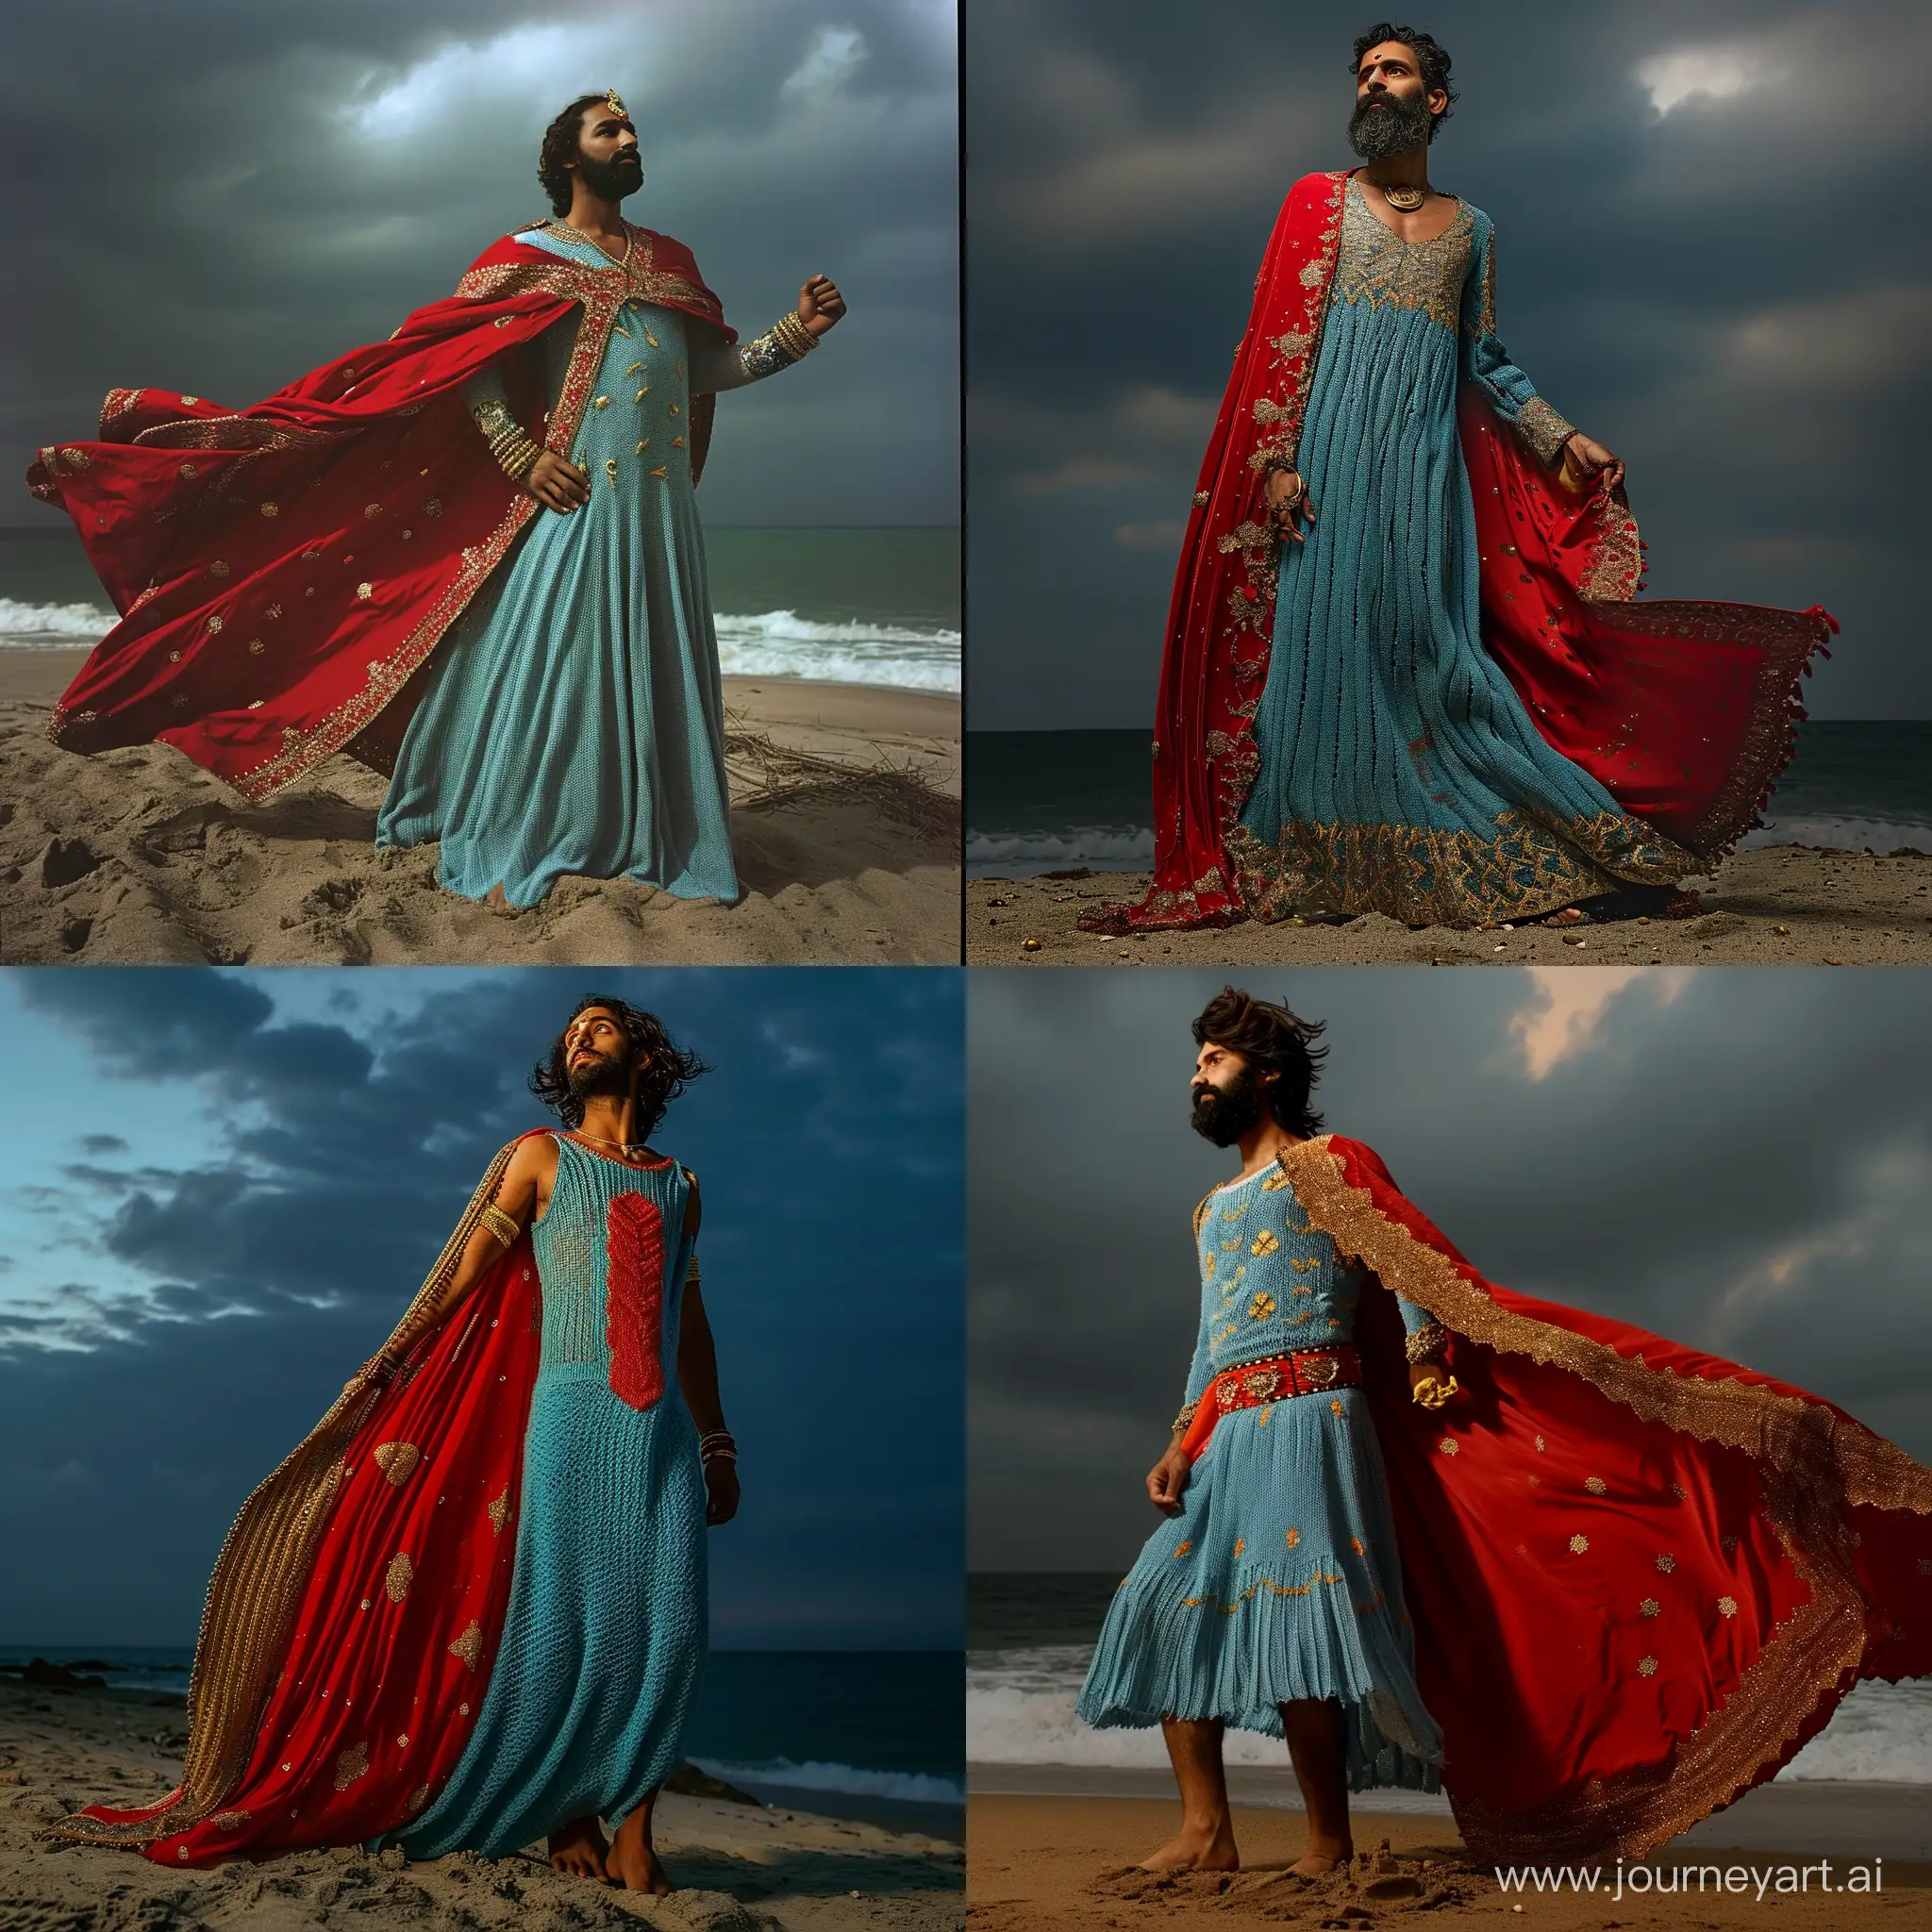 Bohemian-Men-in-Blue-Knitted-Dress-with-Red-Cape-on-the-Beach